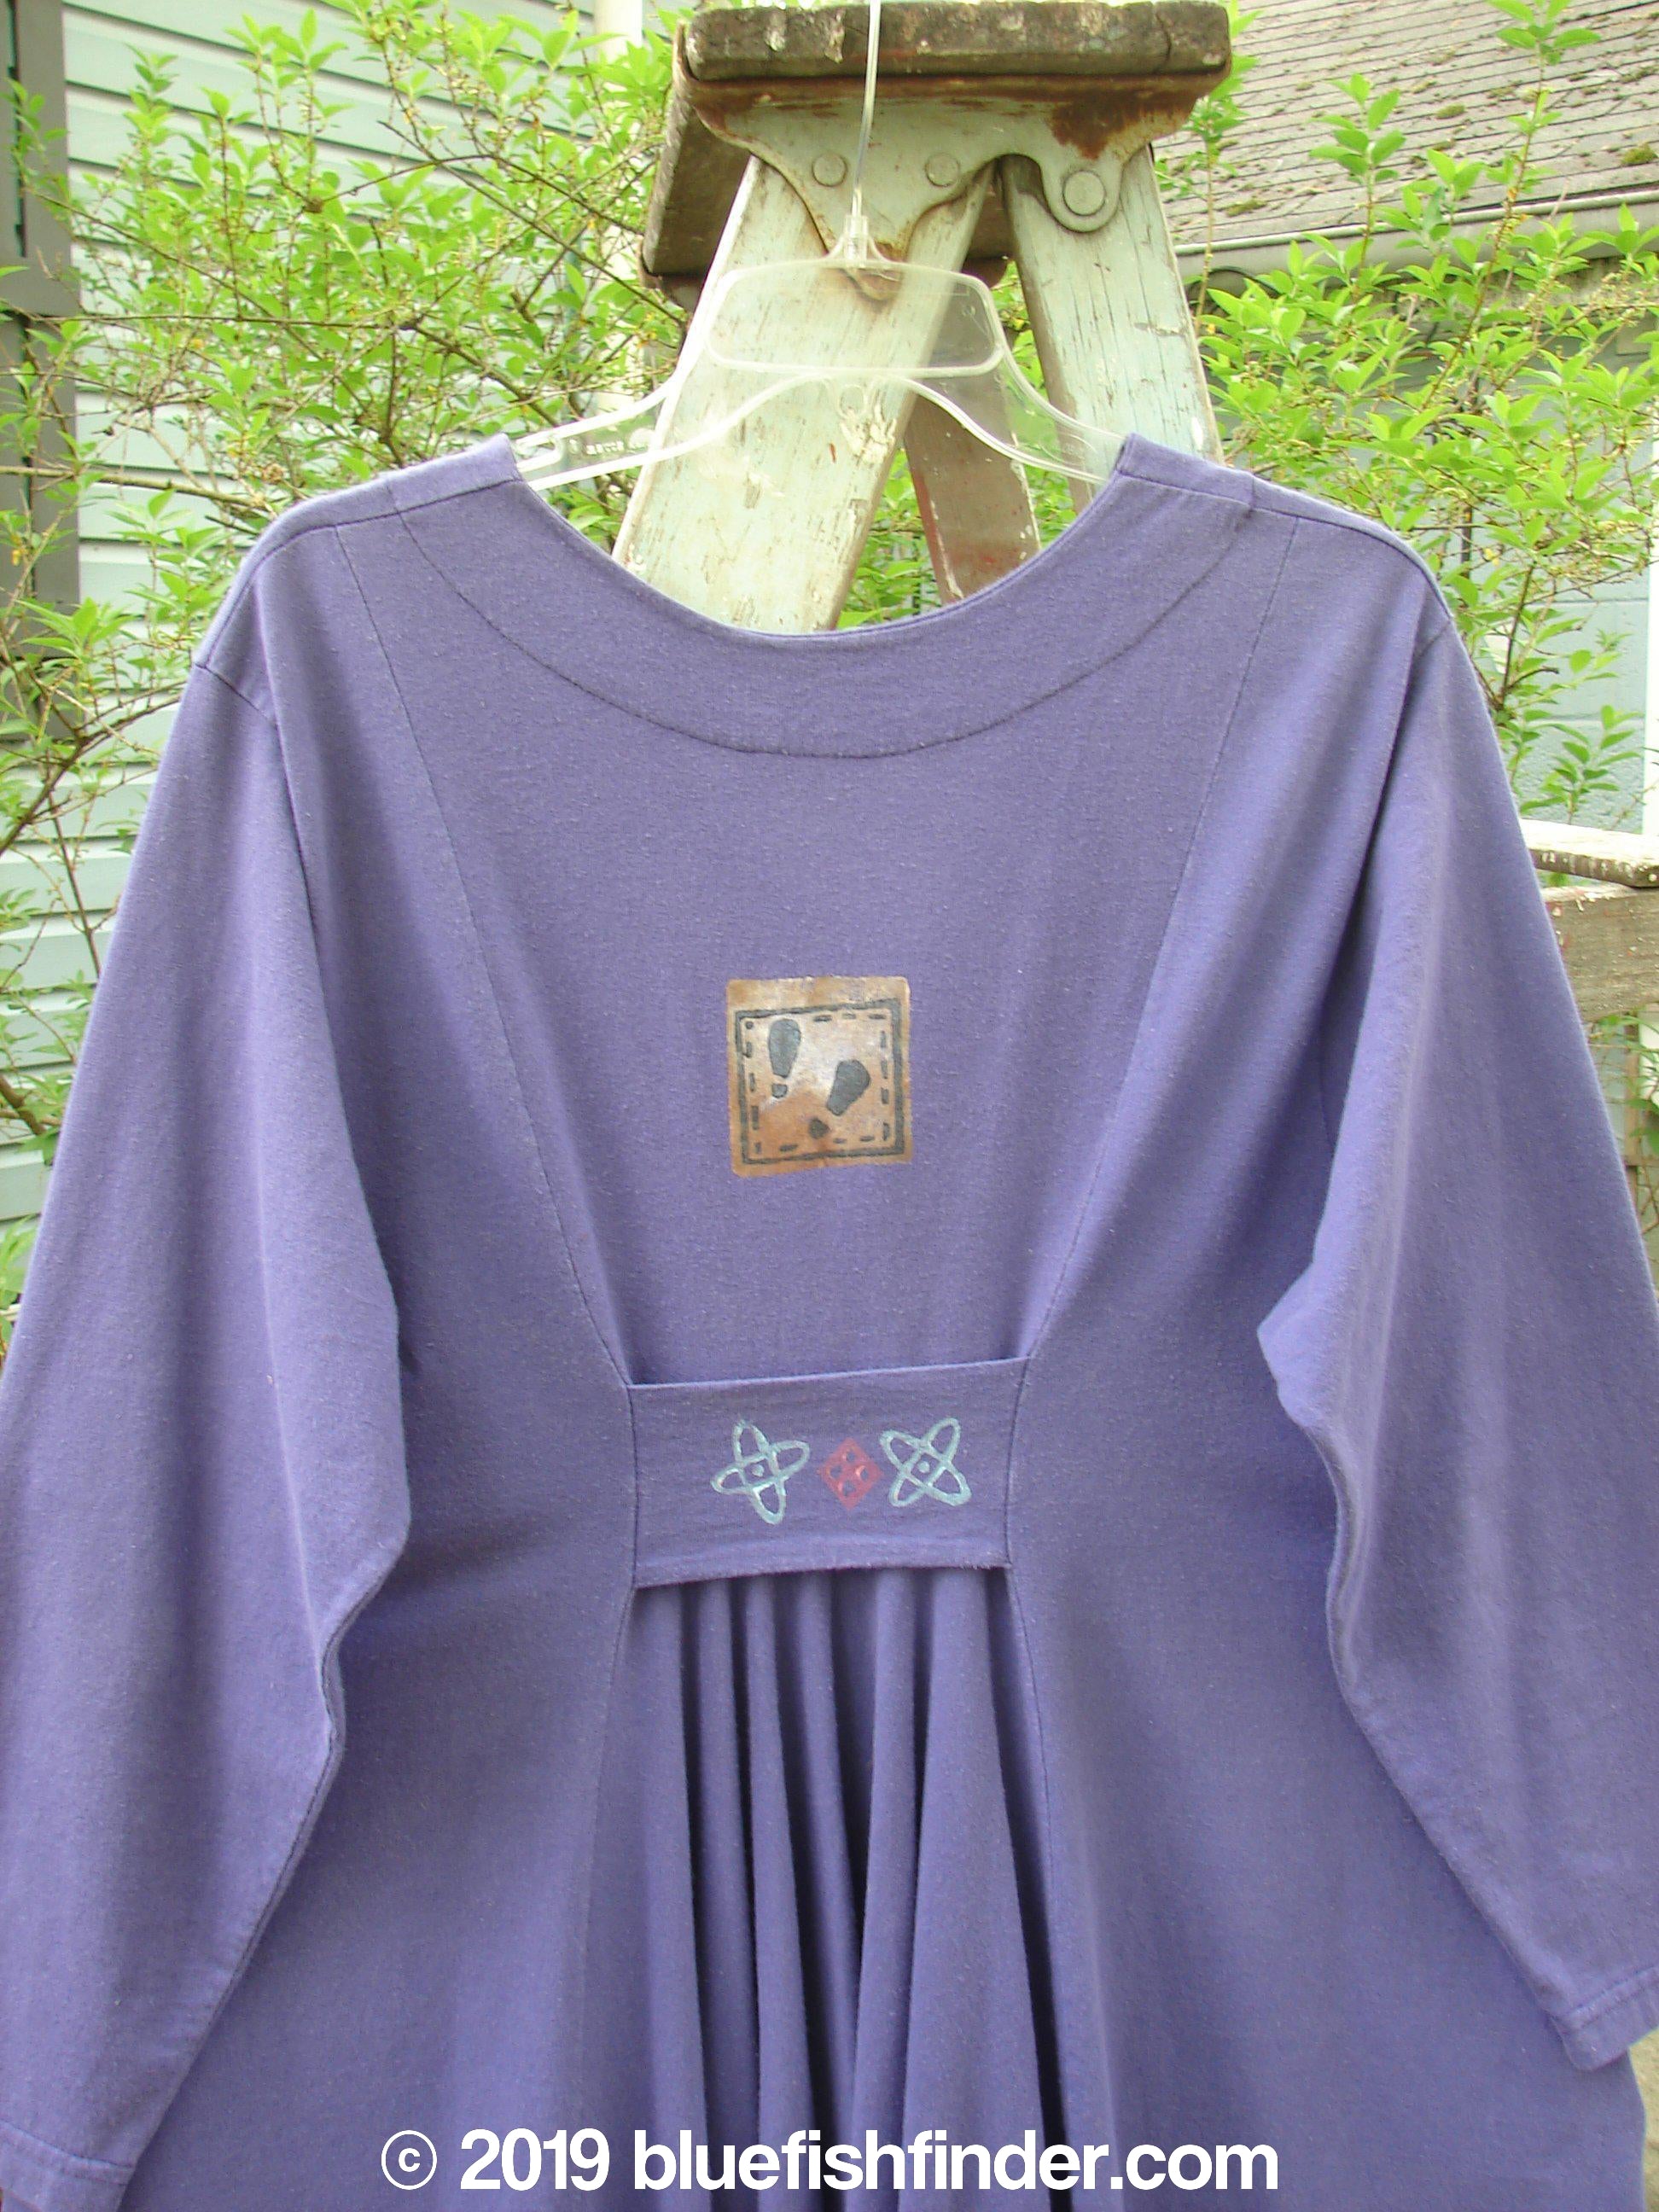 1996 Dining Car Jacket Travel Niagara Size 1: A purple dress with a logo on it. Features include swing hemline, deep V neckline, and artisan buttons.